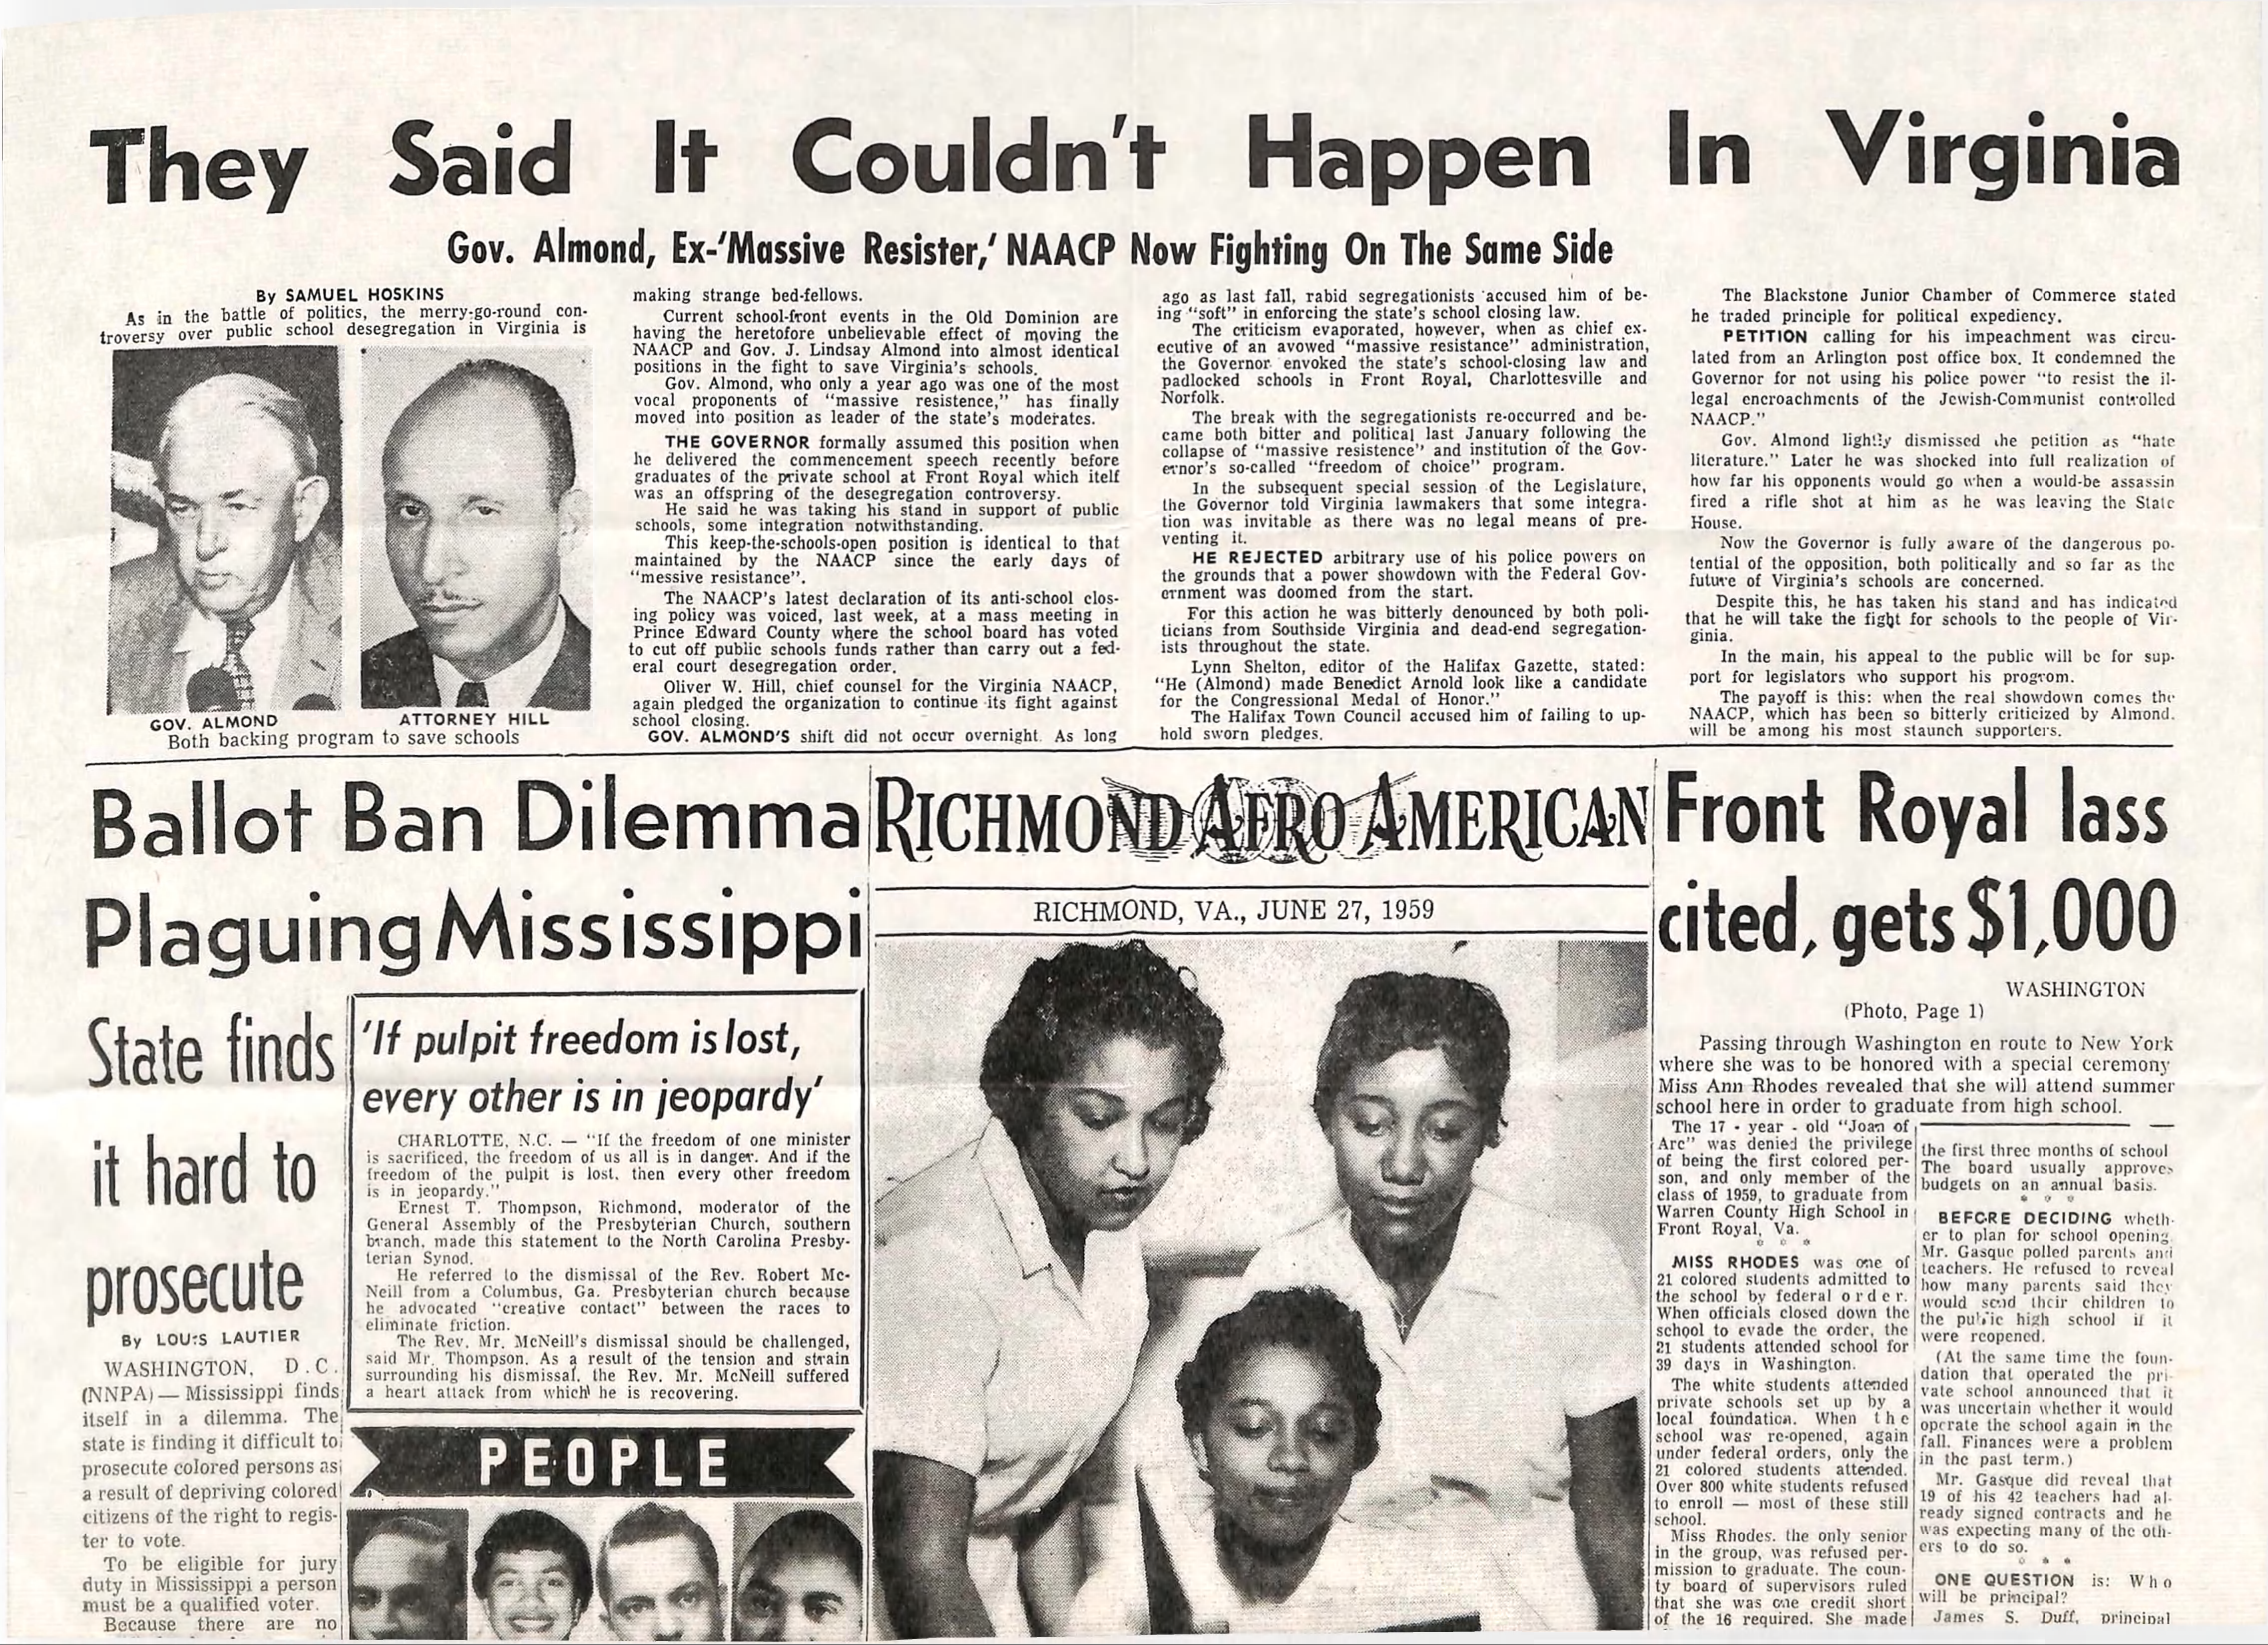 Article concerning the events in Virginia that have caused Governor J. Lindsay Almond and the NAACP to be in agreement on supporting public schools in Virginia against massive resistance. Richmond Afro-American, June 27, 1959. Source: Center for Local History, Arlington Public Library.